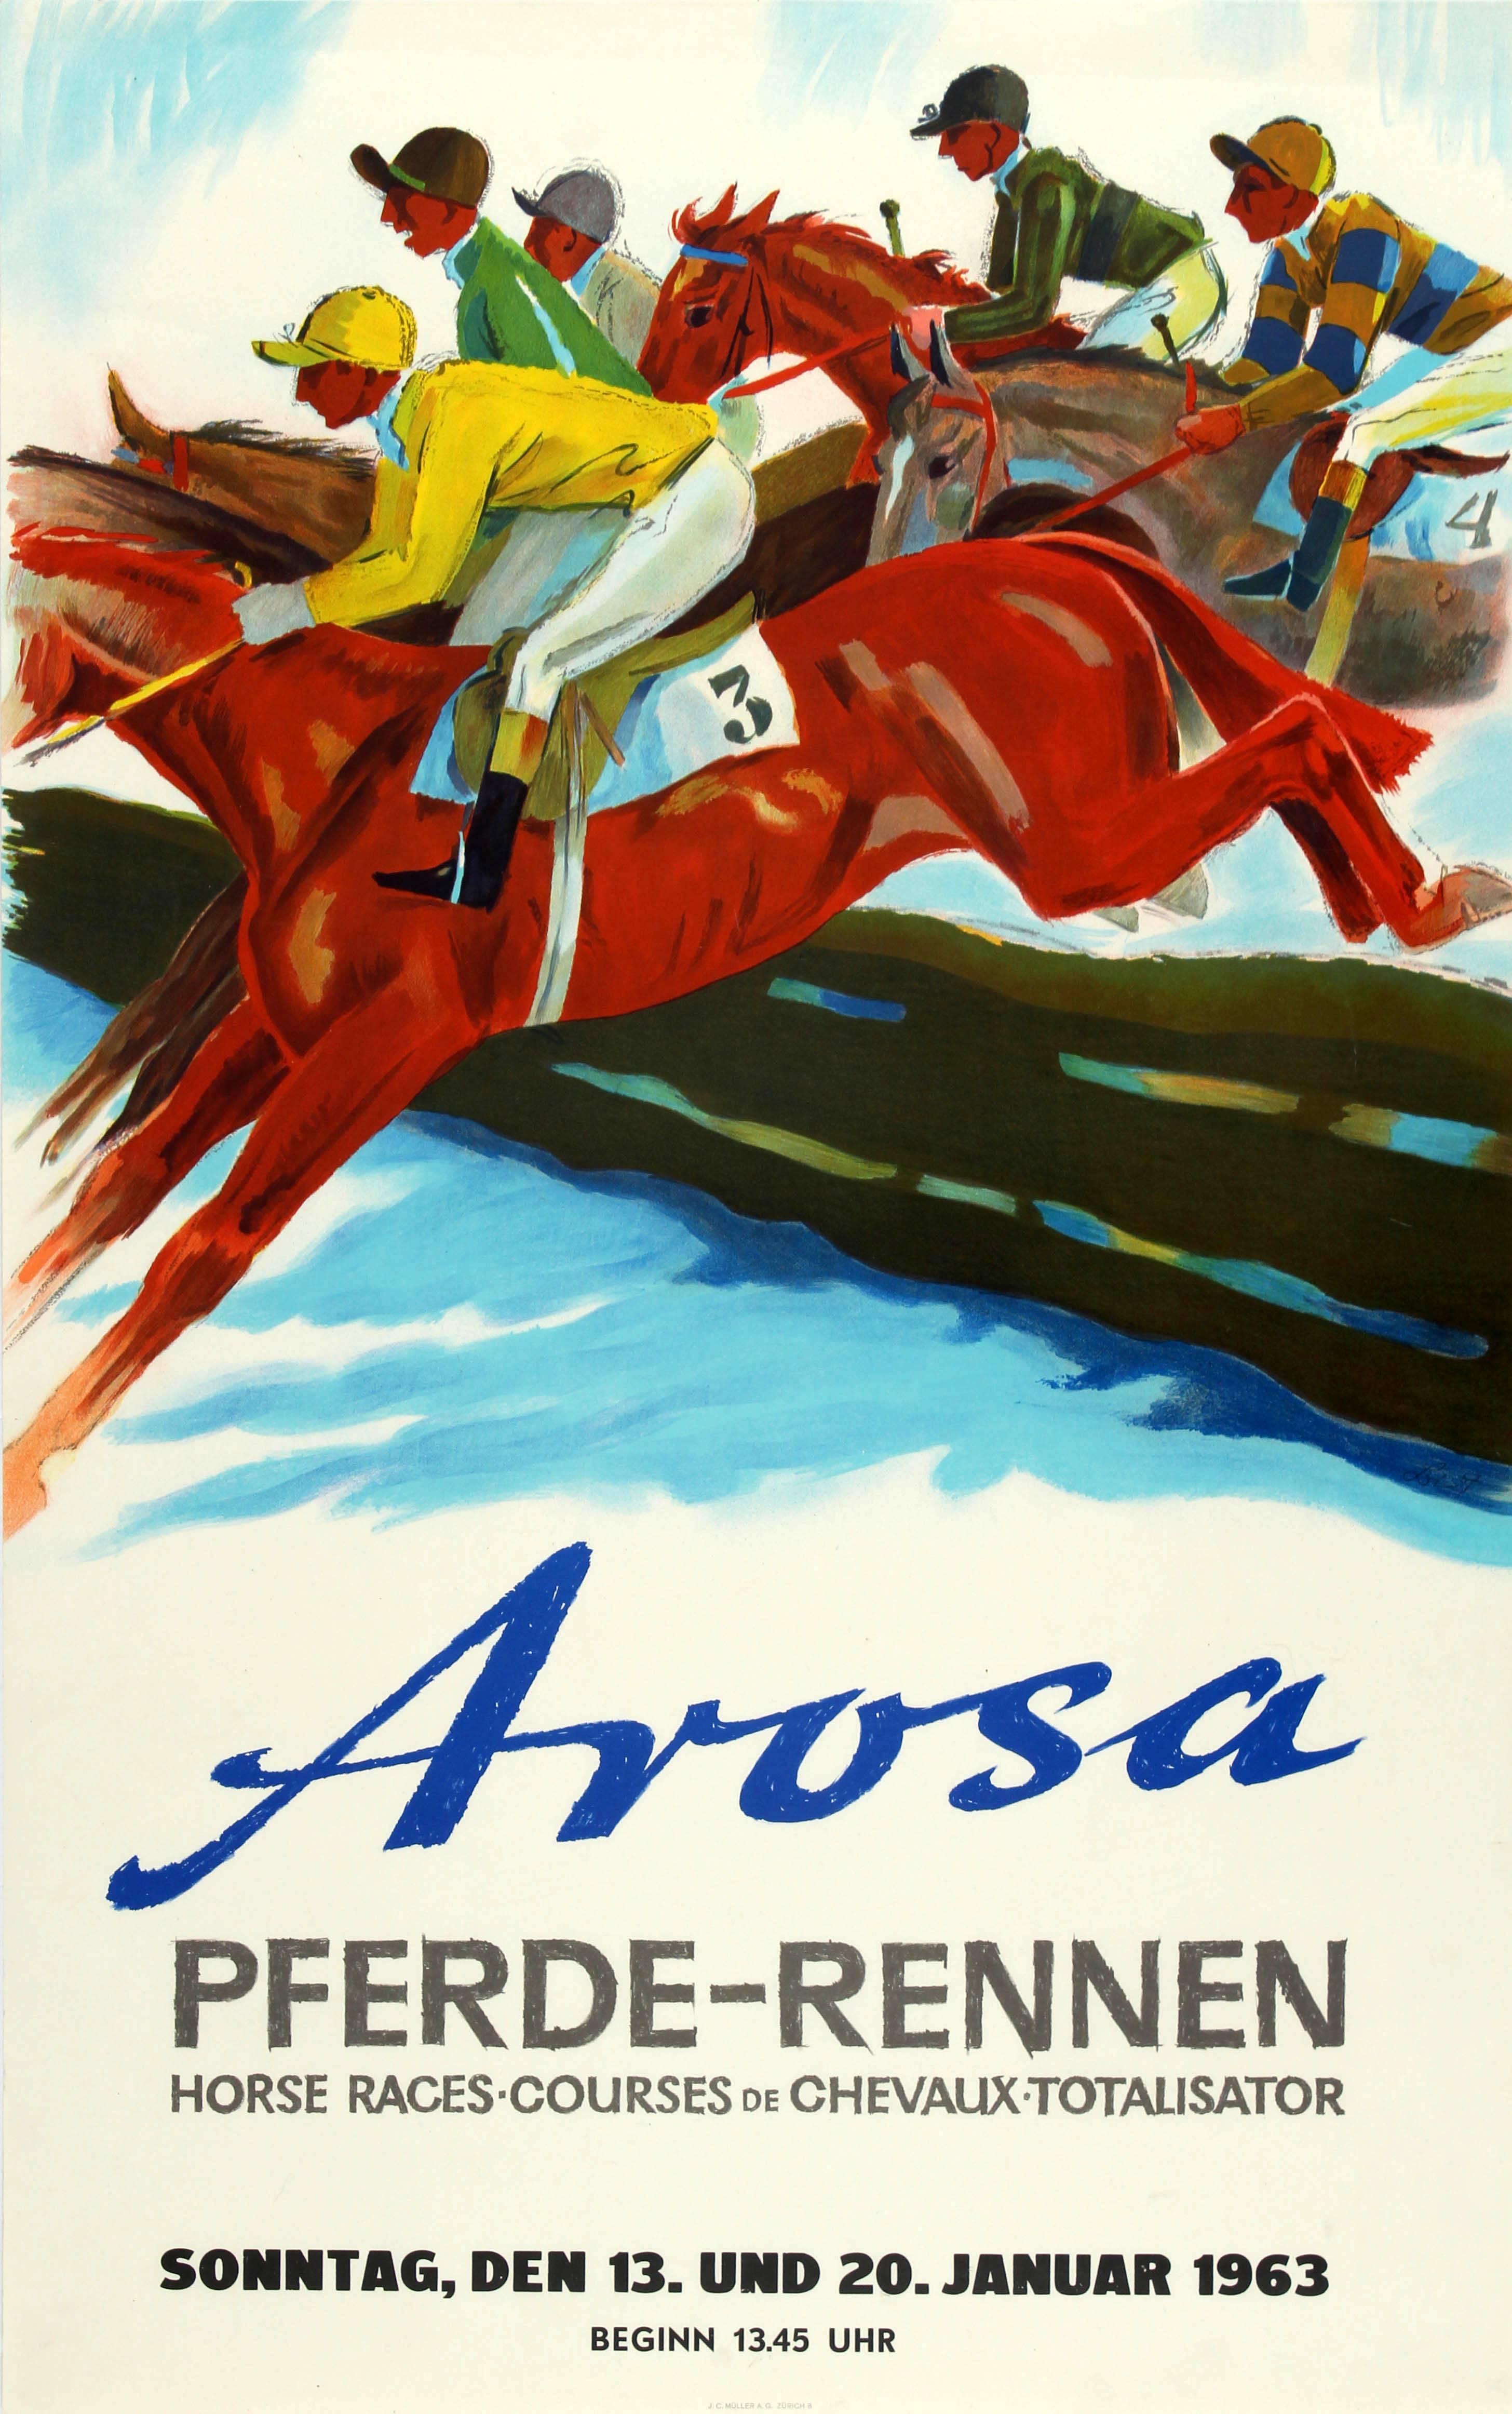 Unknown Print - Original Vintage Steeplechase Horse Race Poster For The 1963 Arosa Pferde-Rennen